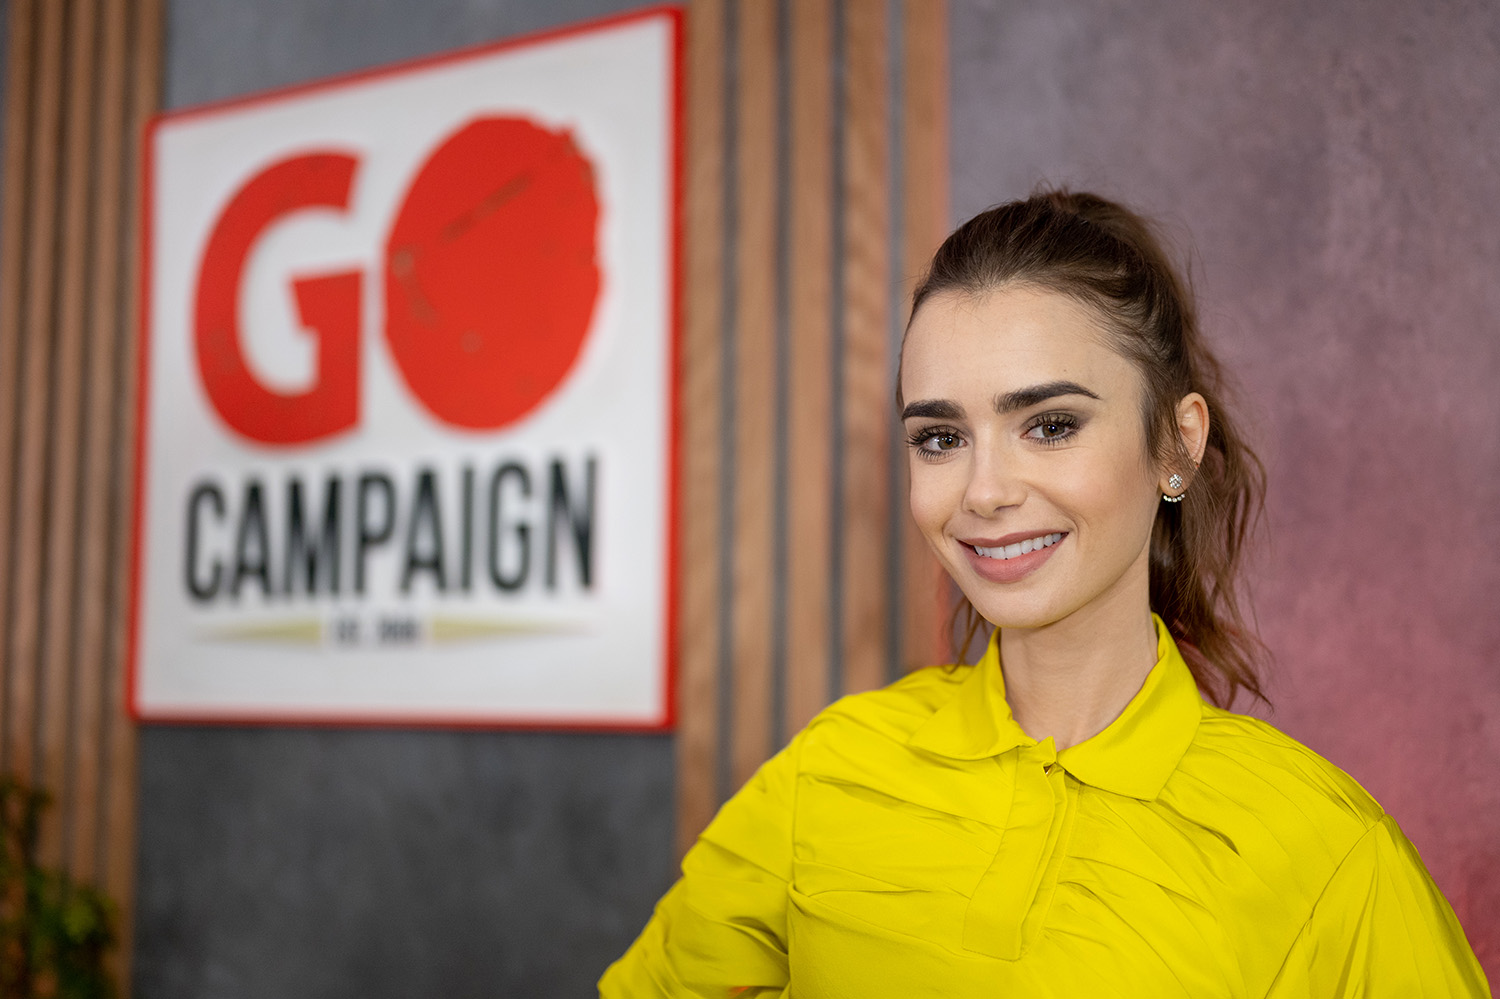 Emily in Paris star Lily Collins at the 15th annual Go Gala